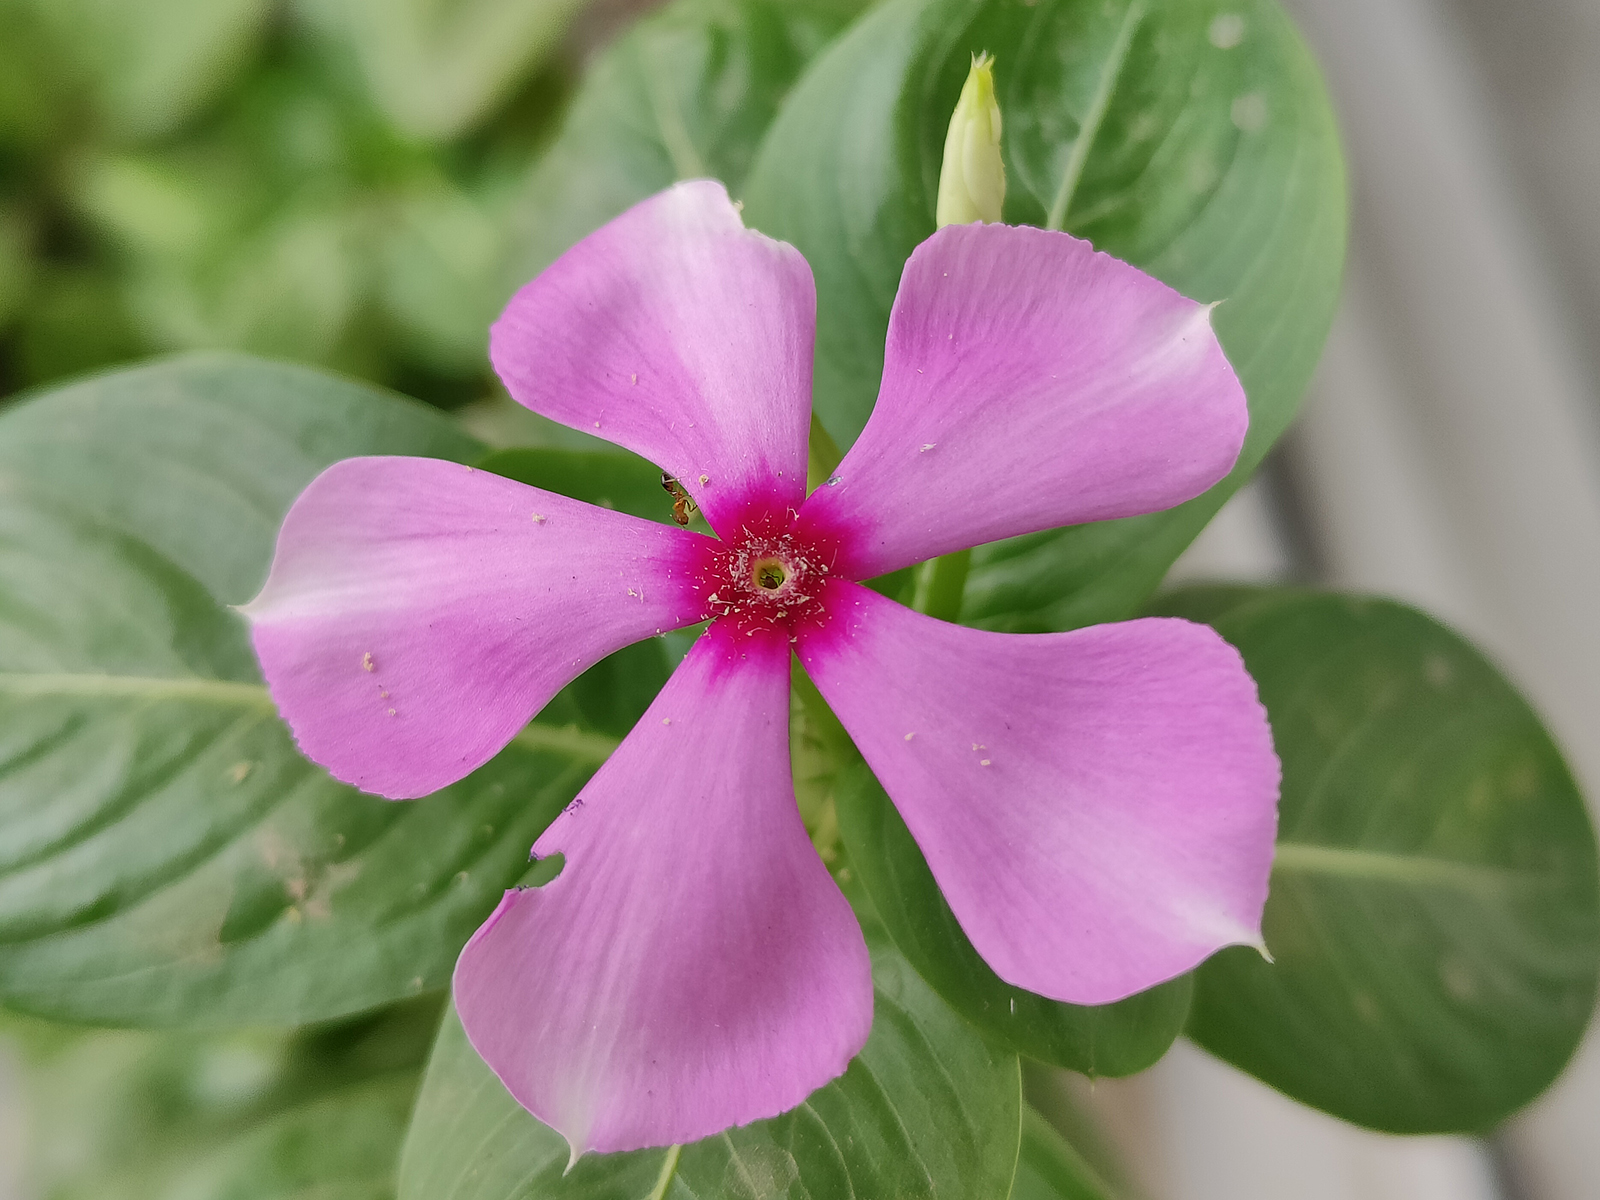 A pink flower and green leaves photographed with the Realme GT 2 Pro's primary 50MP camera.